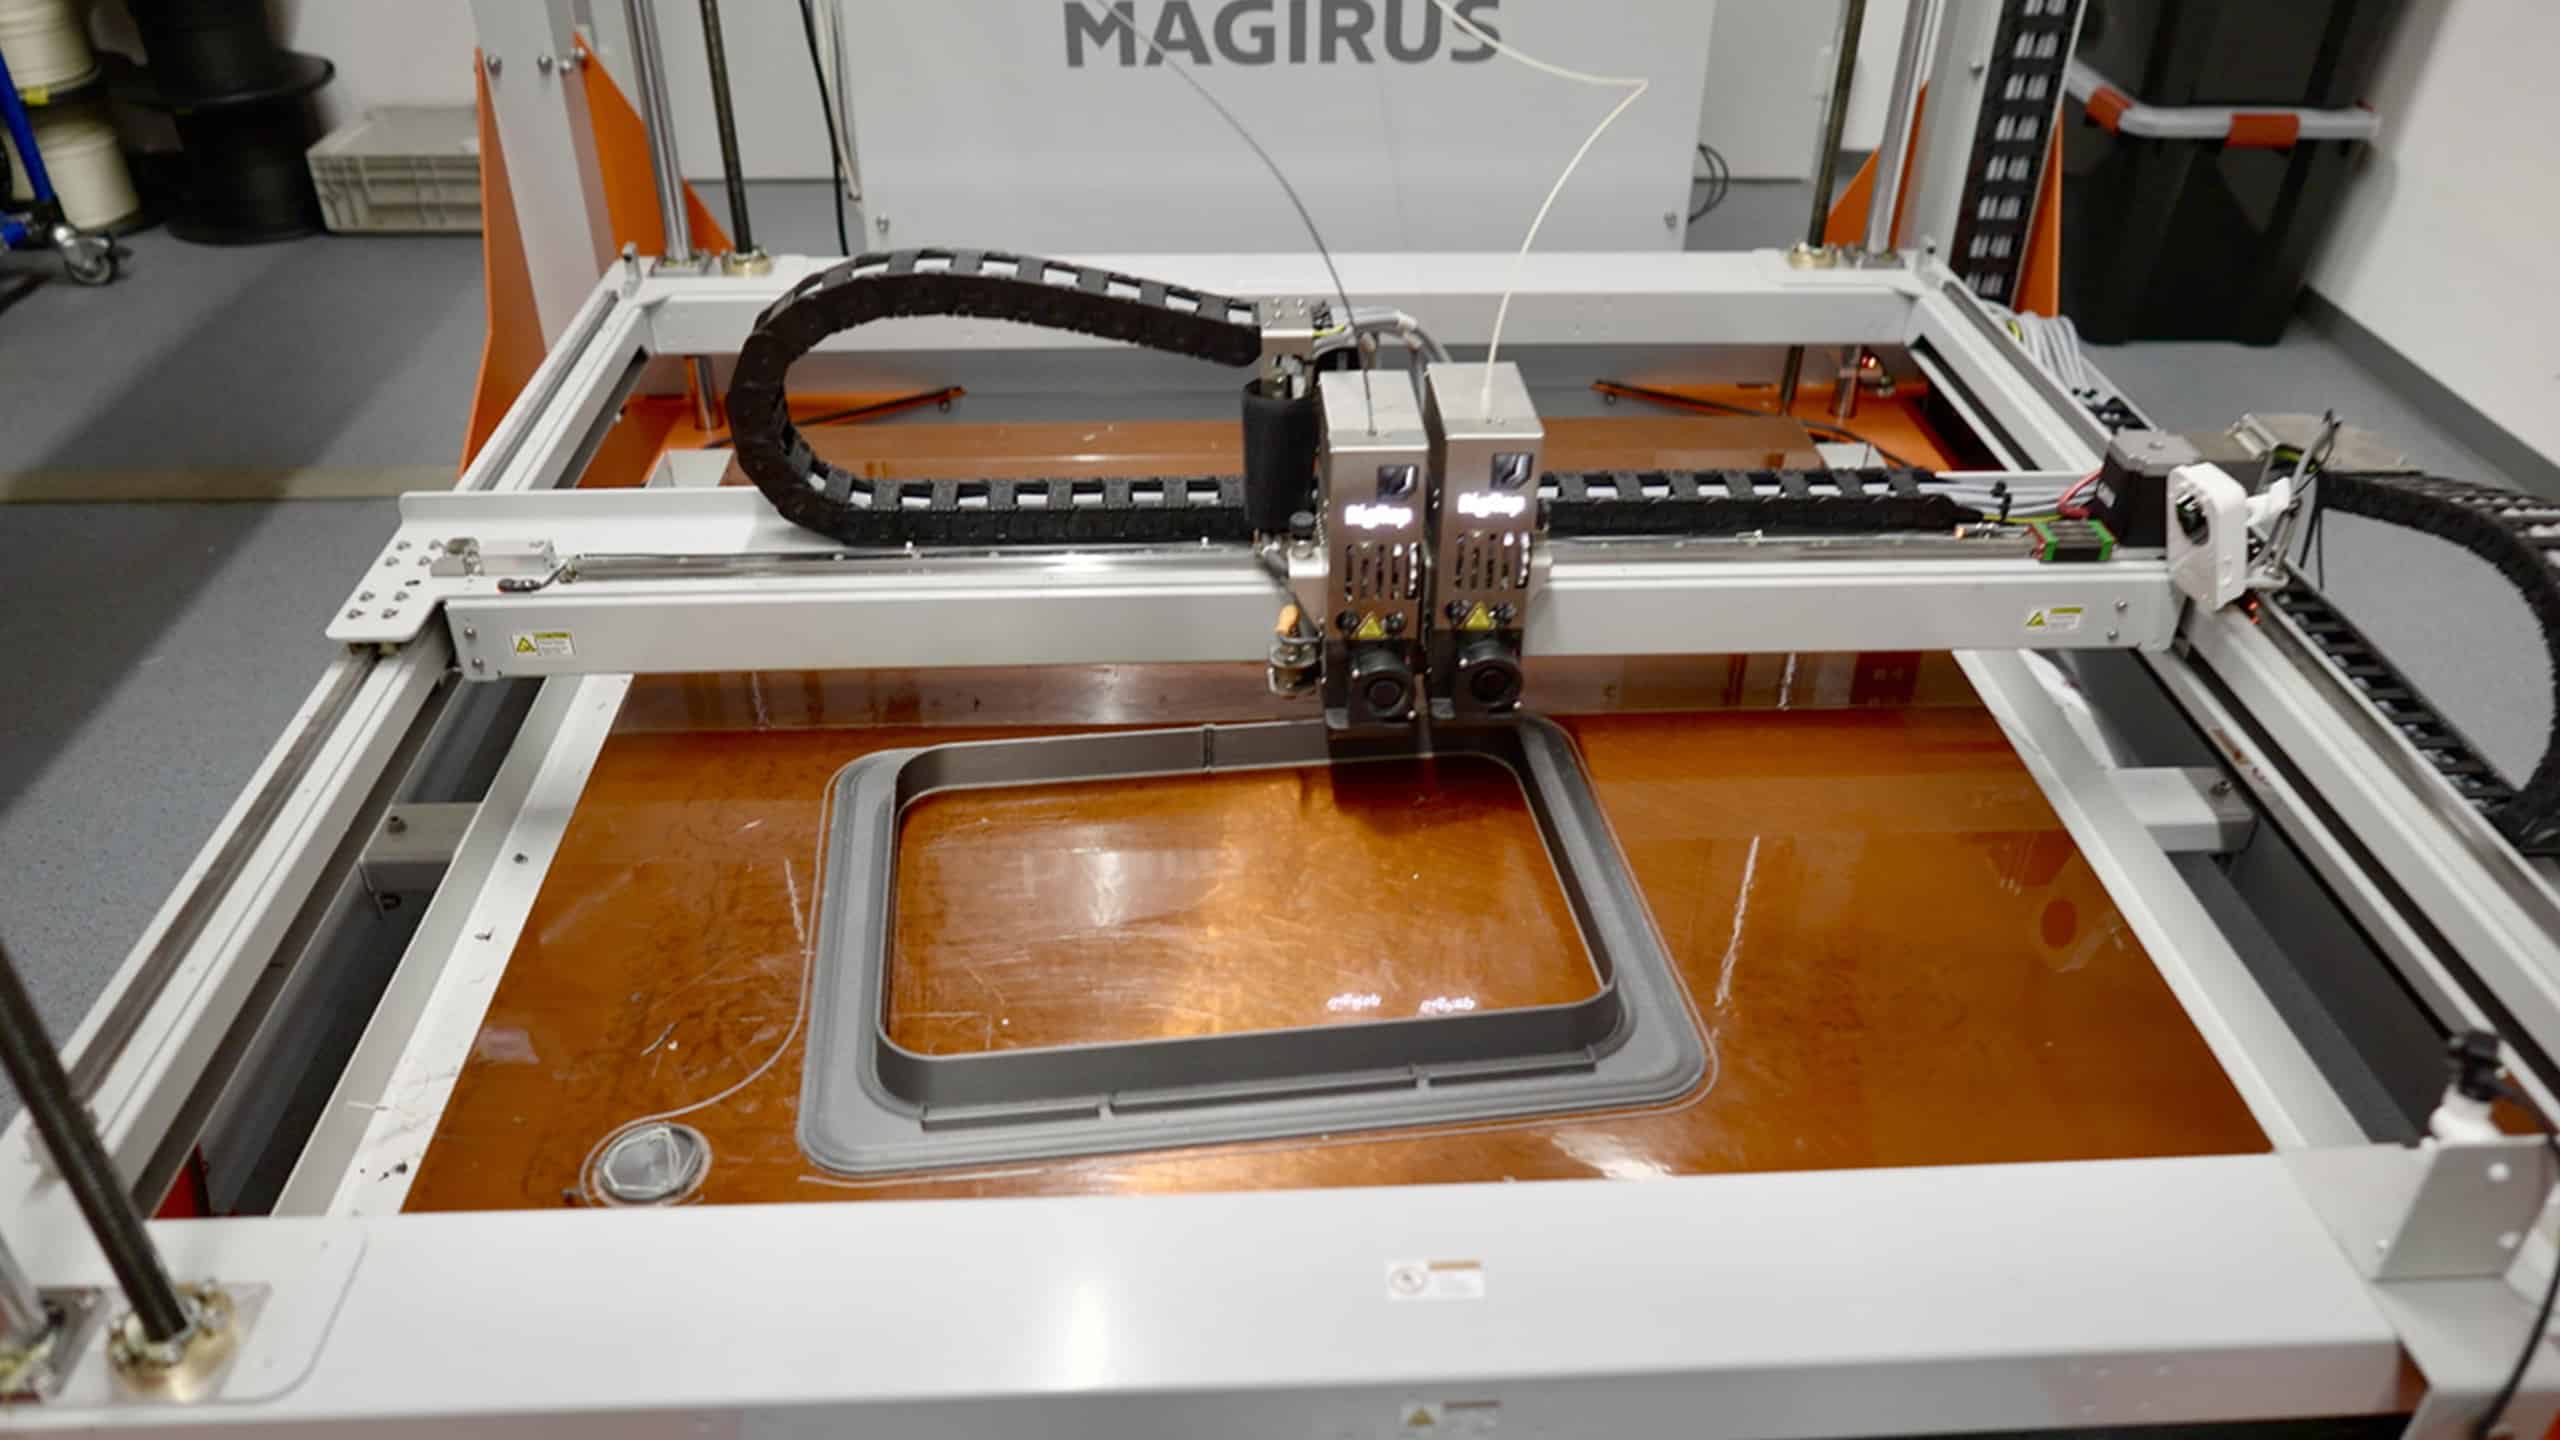 The 3D printer is used for prototyping and end-use parts. Here, a window frame that will later be an integral and load bearing part of a door is printed.